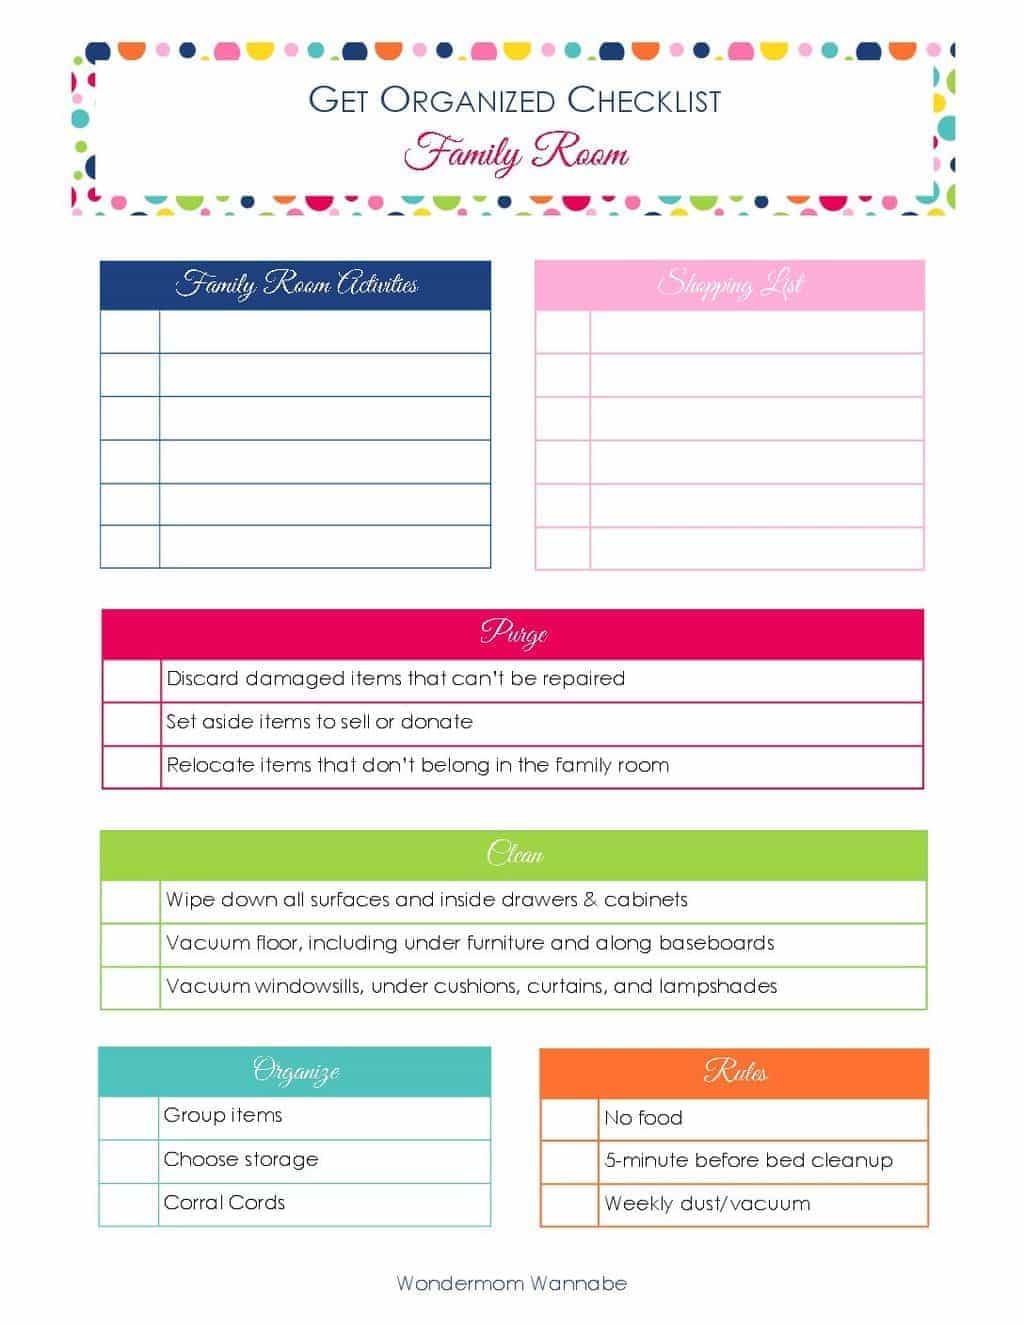 printable Get Organized Checklist for Your Family Room